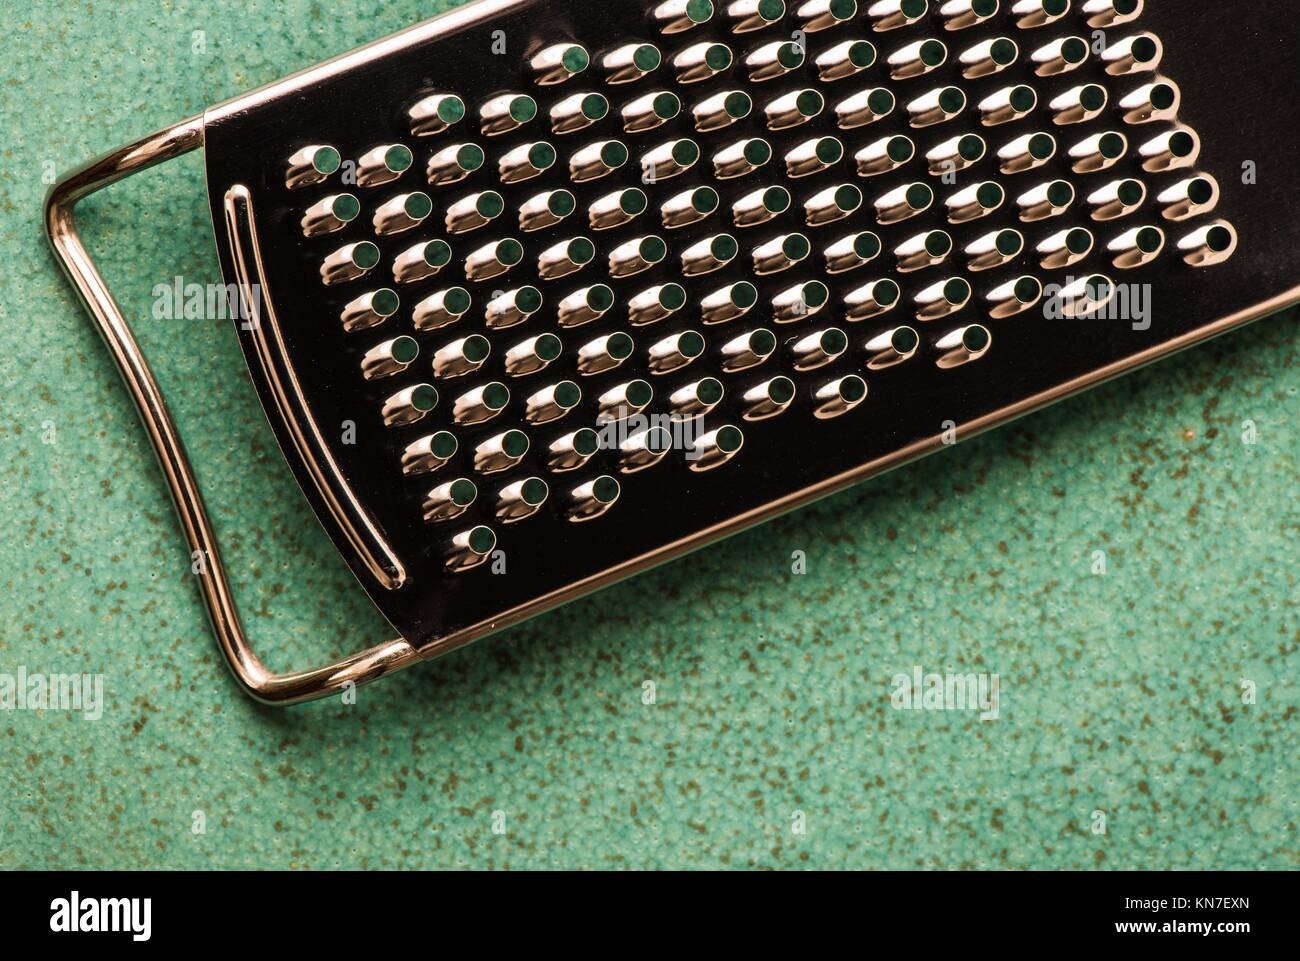 Stainless steel grater in close-up. Kitchen appliance used for grating in food preparation. Stock Photo